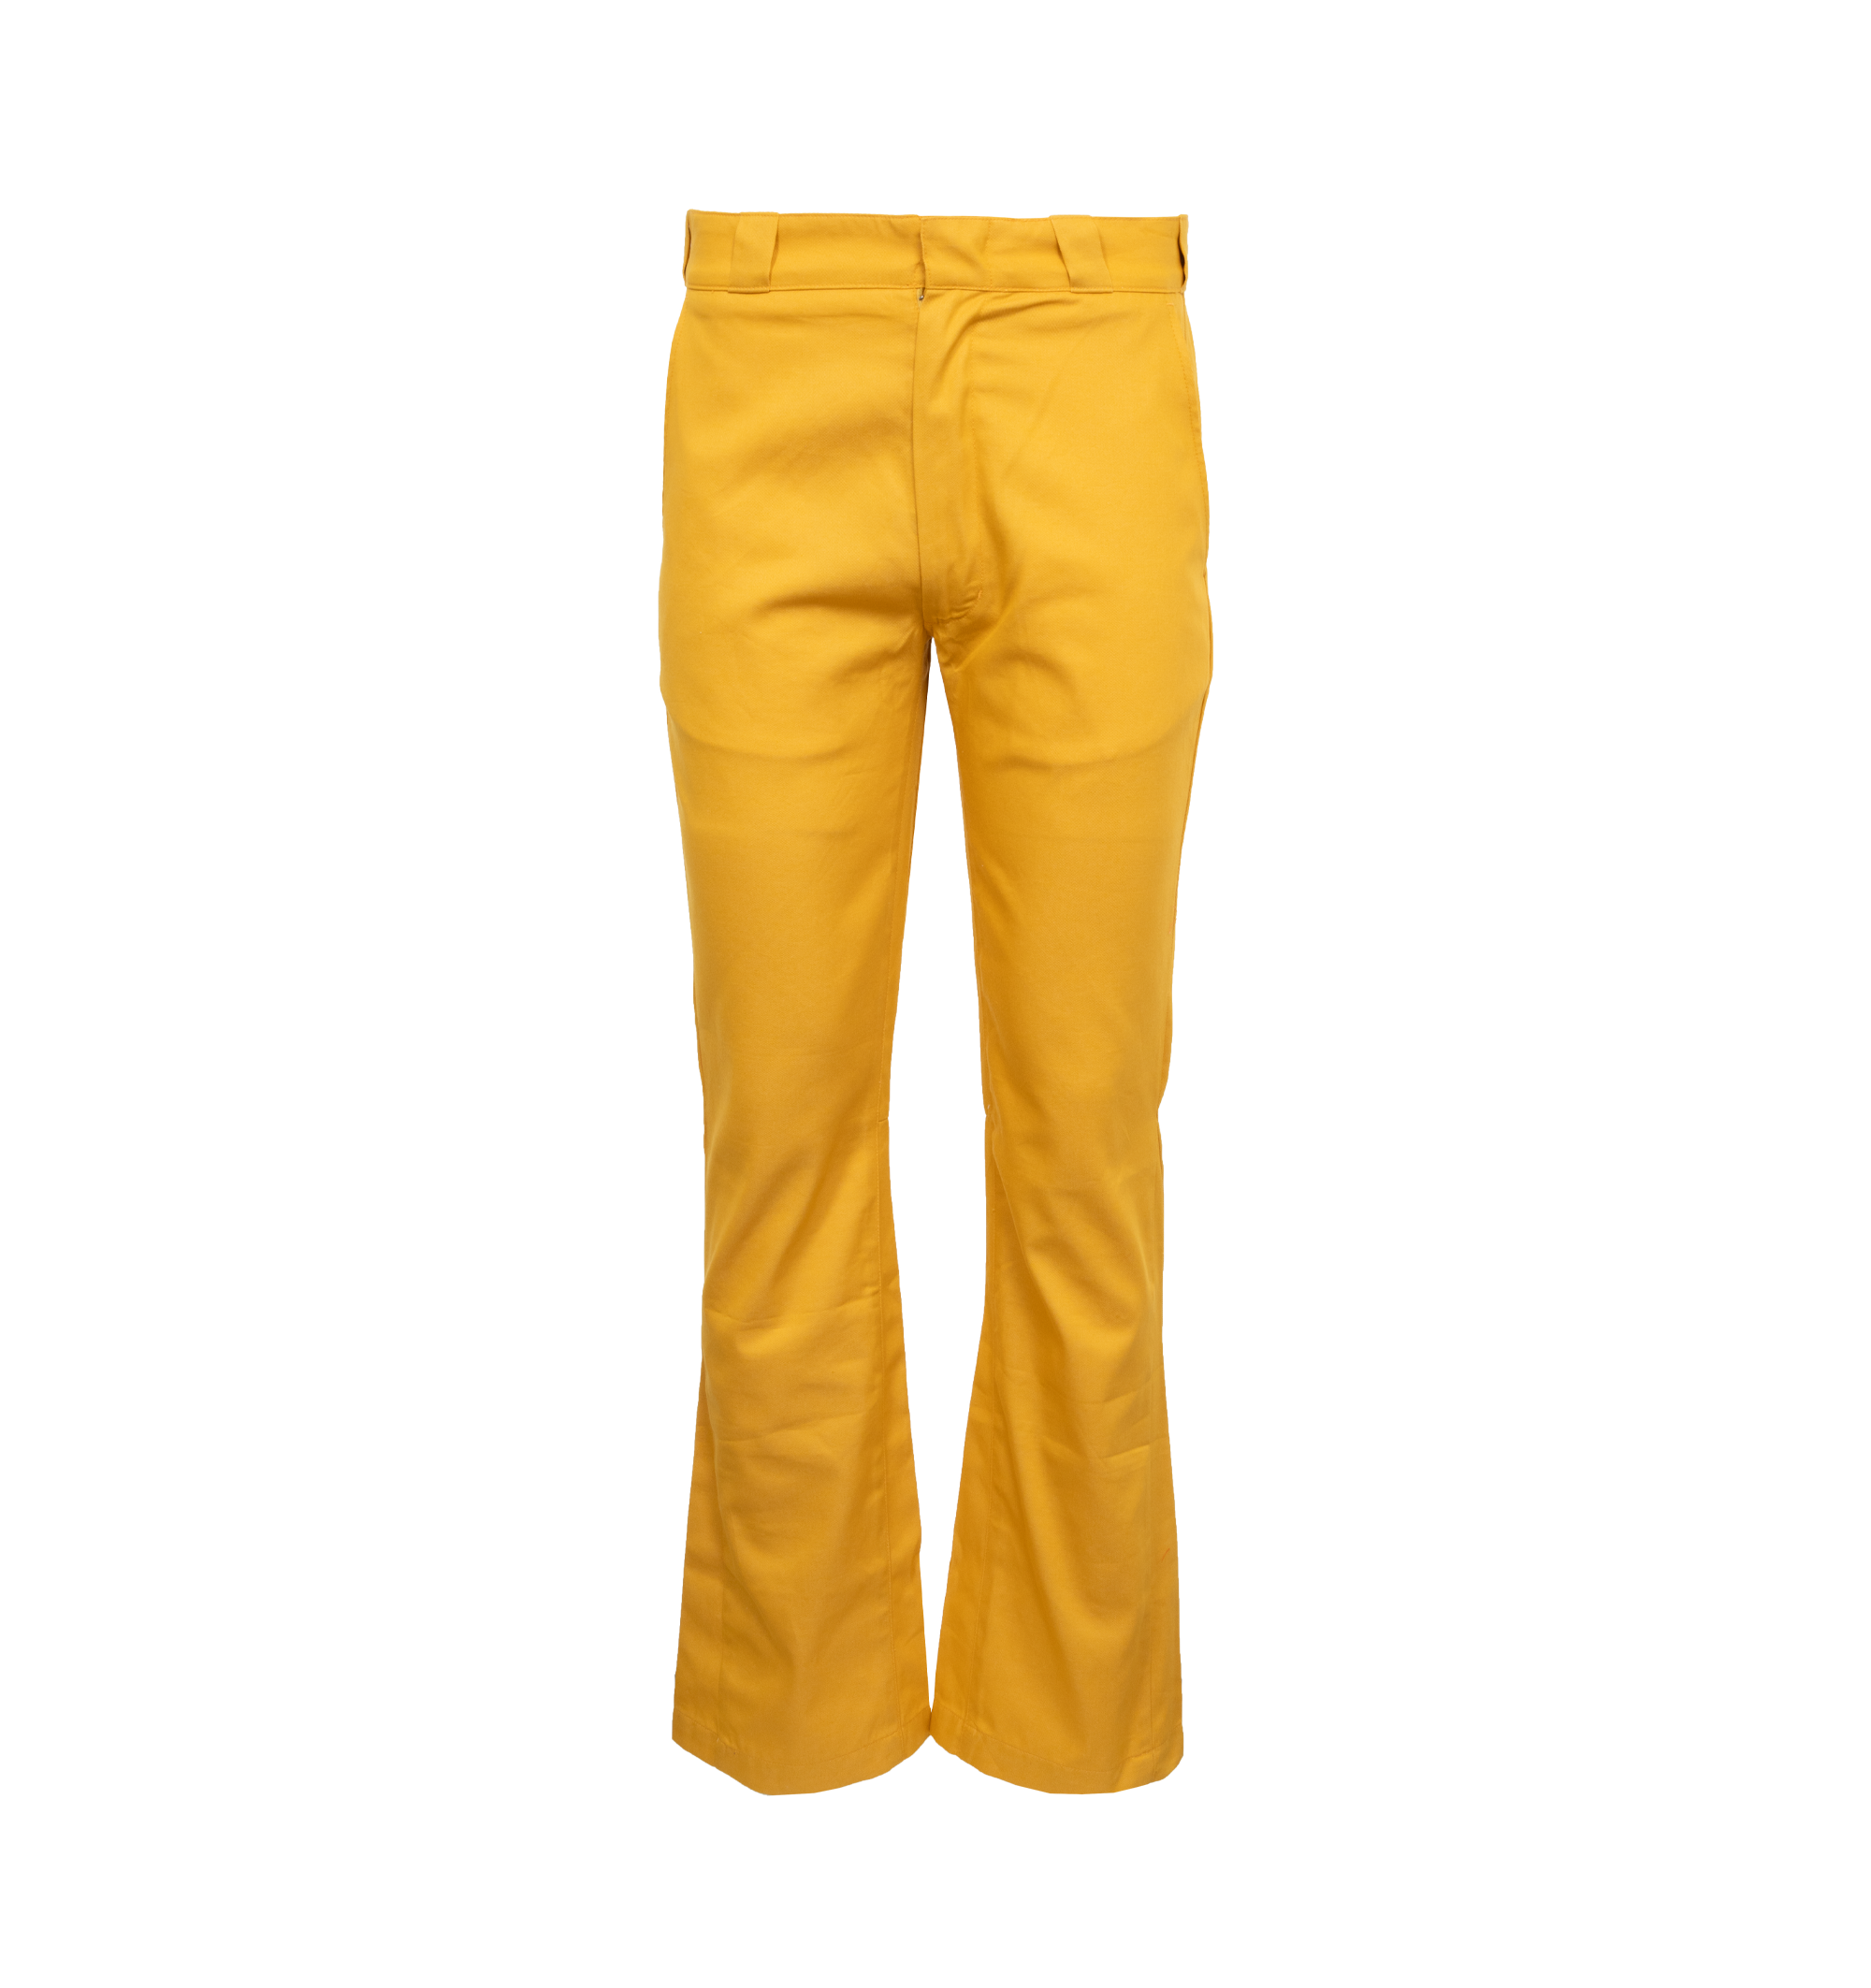 Men's Yellow Pants Outfits-35 Best Ways to Wear Yellow Pants | Mens yellow  pants, Mens outfits, Yellow pants